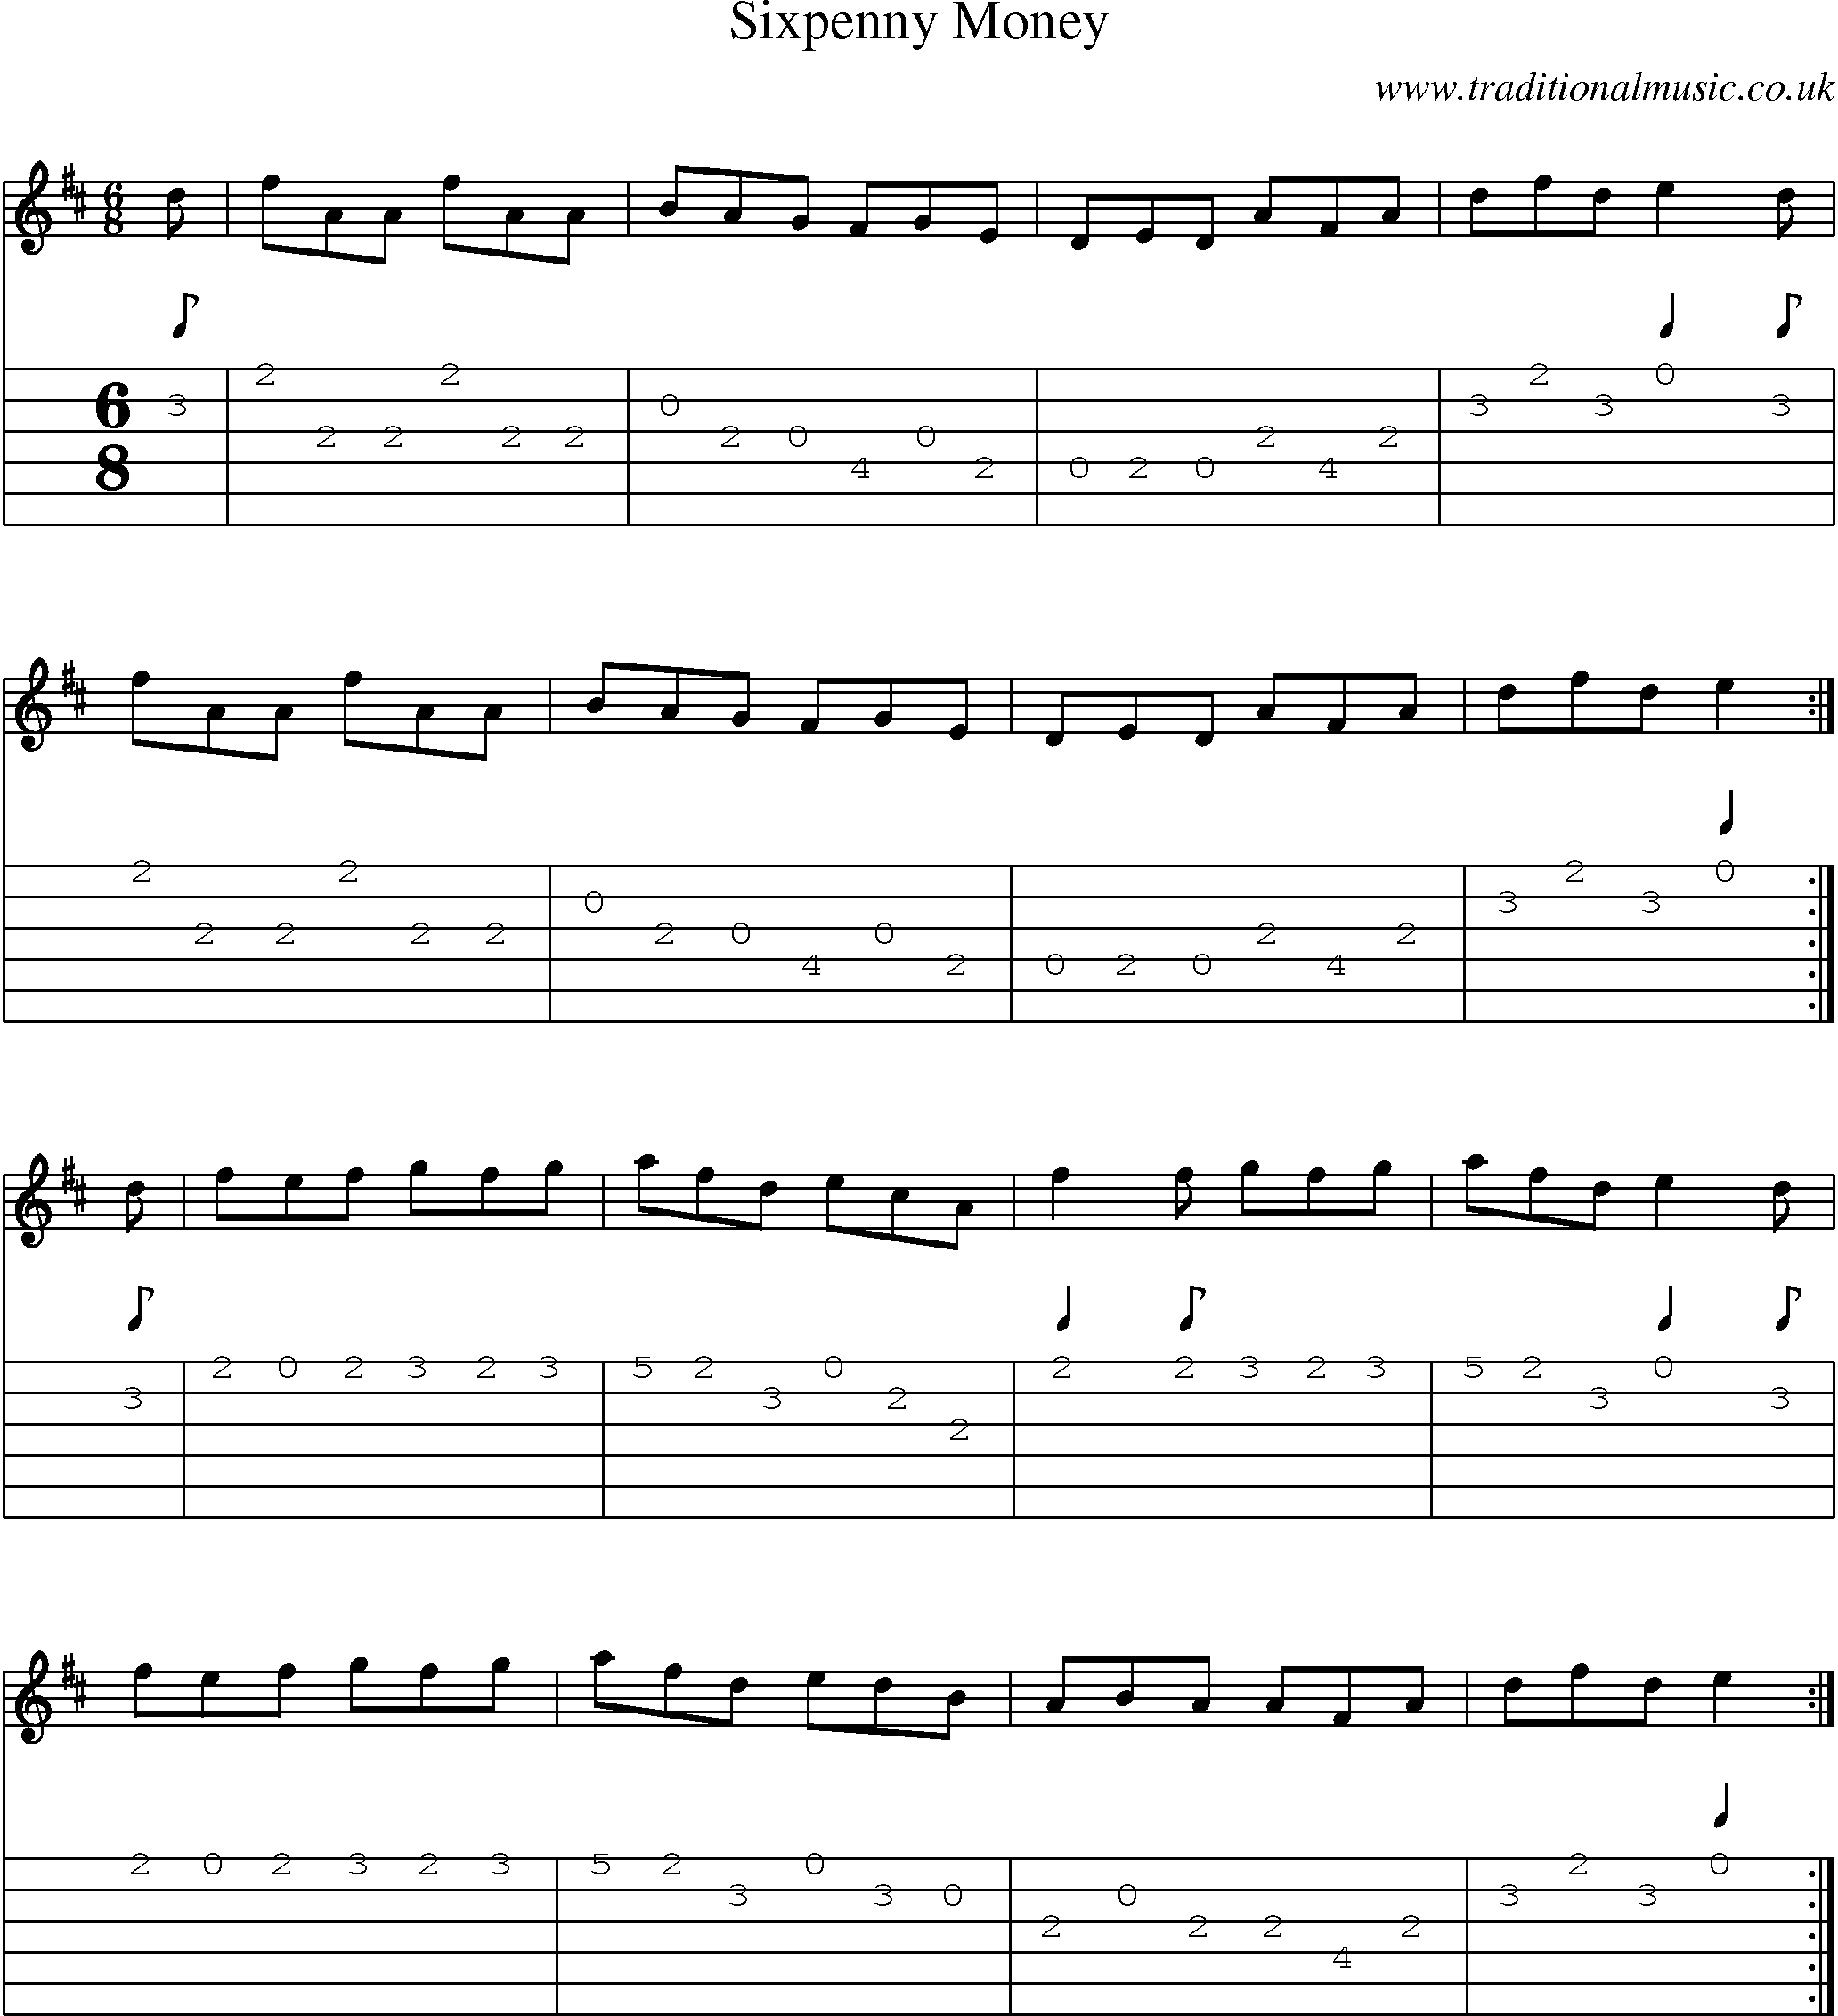 Music Score and Guitar Tabs for Sixpenny Money